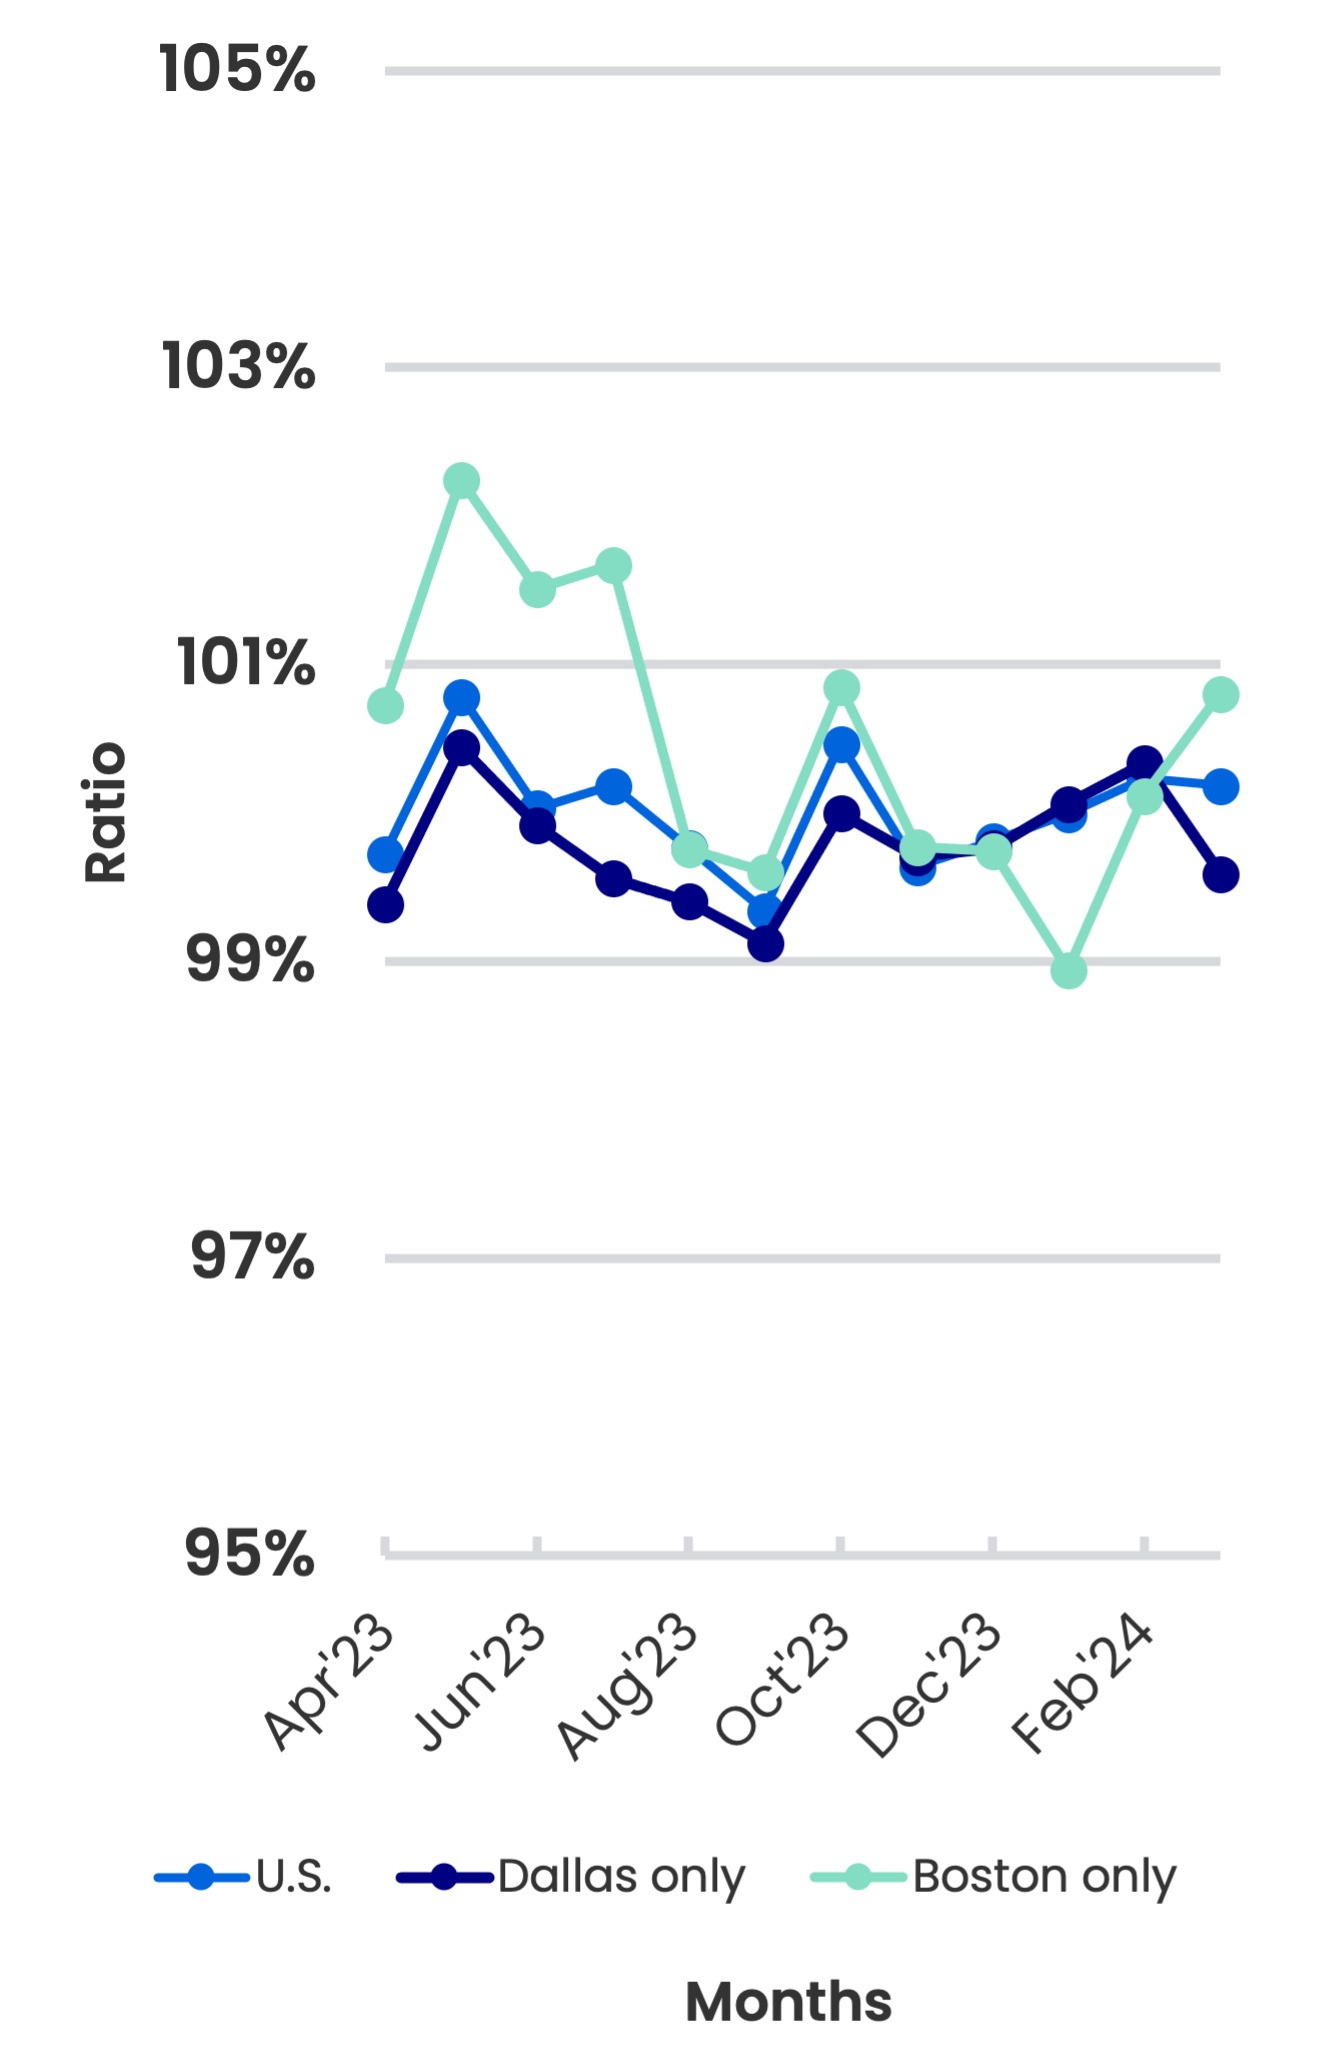 Line graph showing the revenue-to-expense ratio (Y-axis) reported by small businesses over time by months (X-axis). There are three data lines: Boston only, Dallas only, and the U.S. on average. The lines generally display a flat trend, between a 99% and 101% revenue-to-expense ratio, over 12 months, with Boston's showing more variance between 99% and 103%.